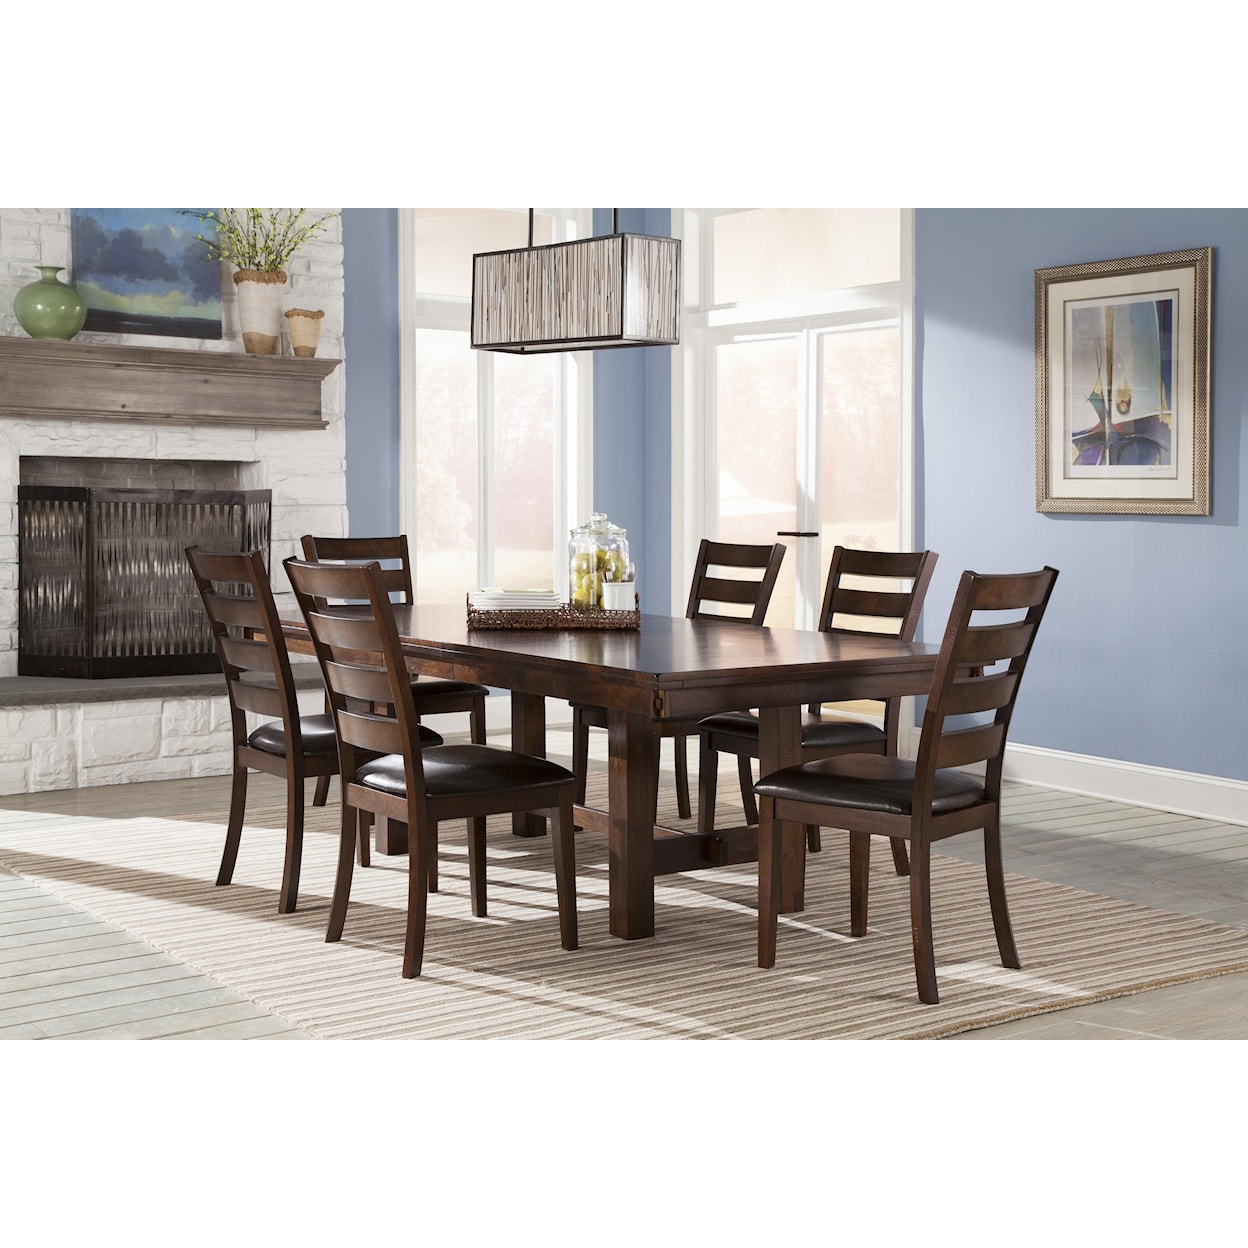 Intercon Kona 5 Piece Table and Chair Set